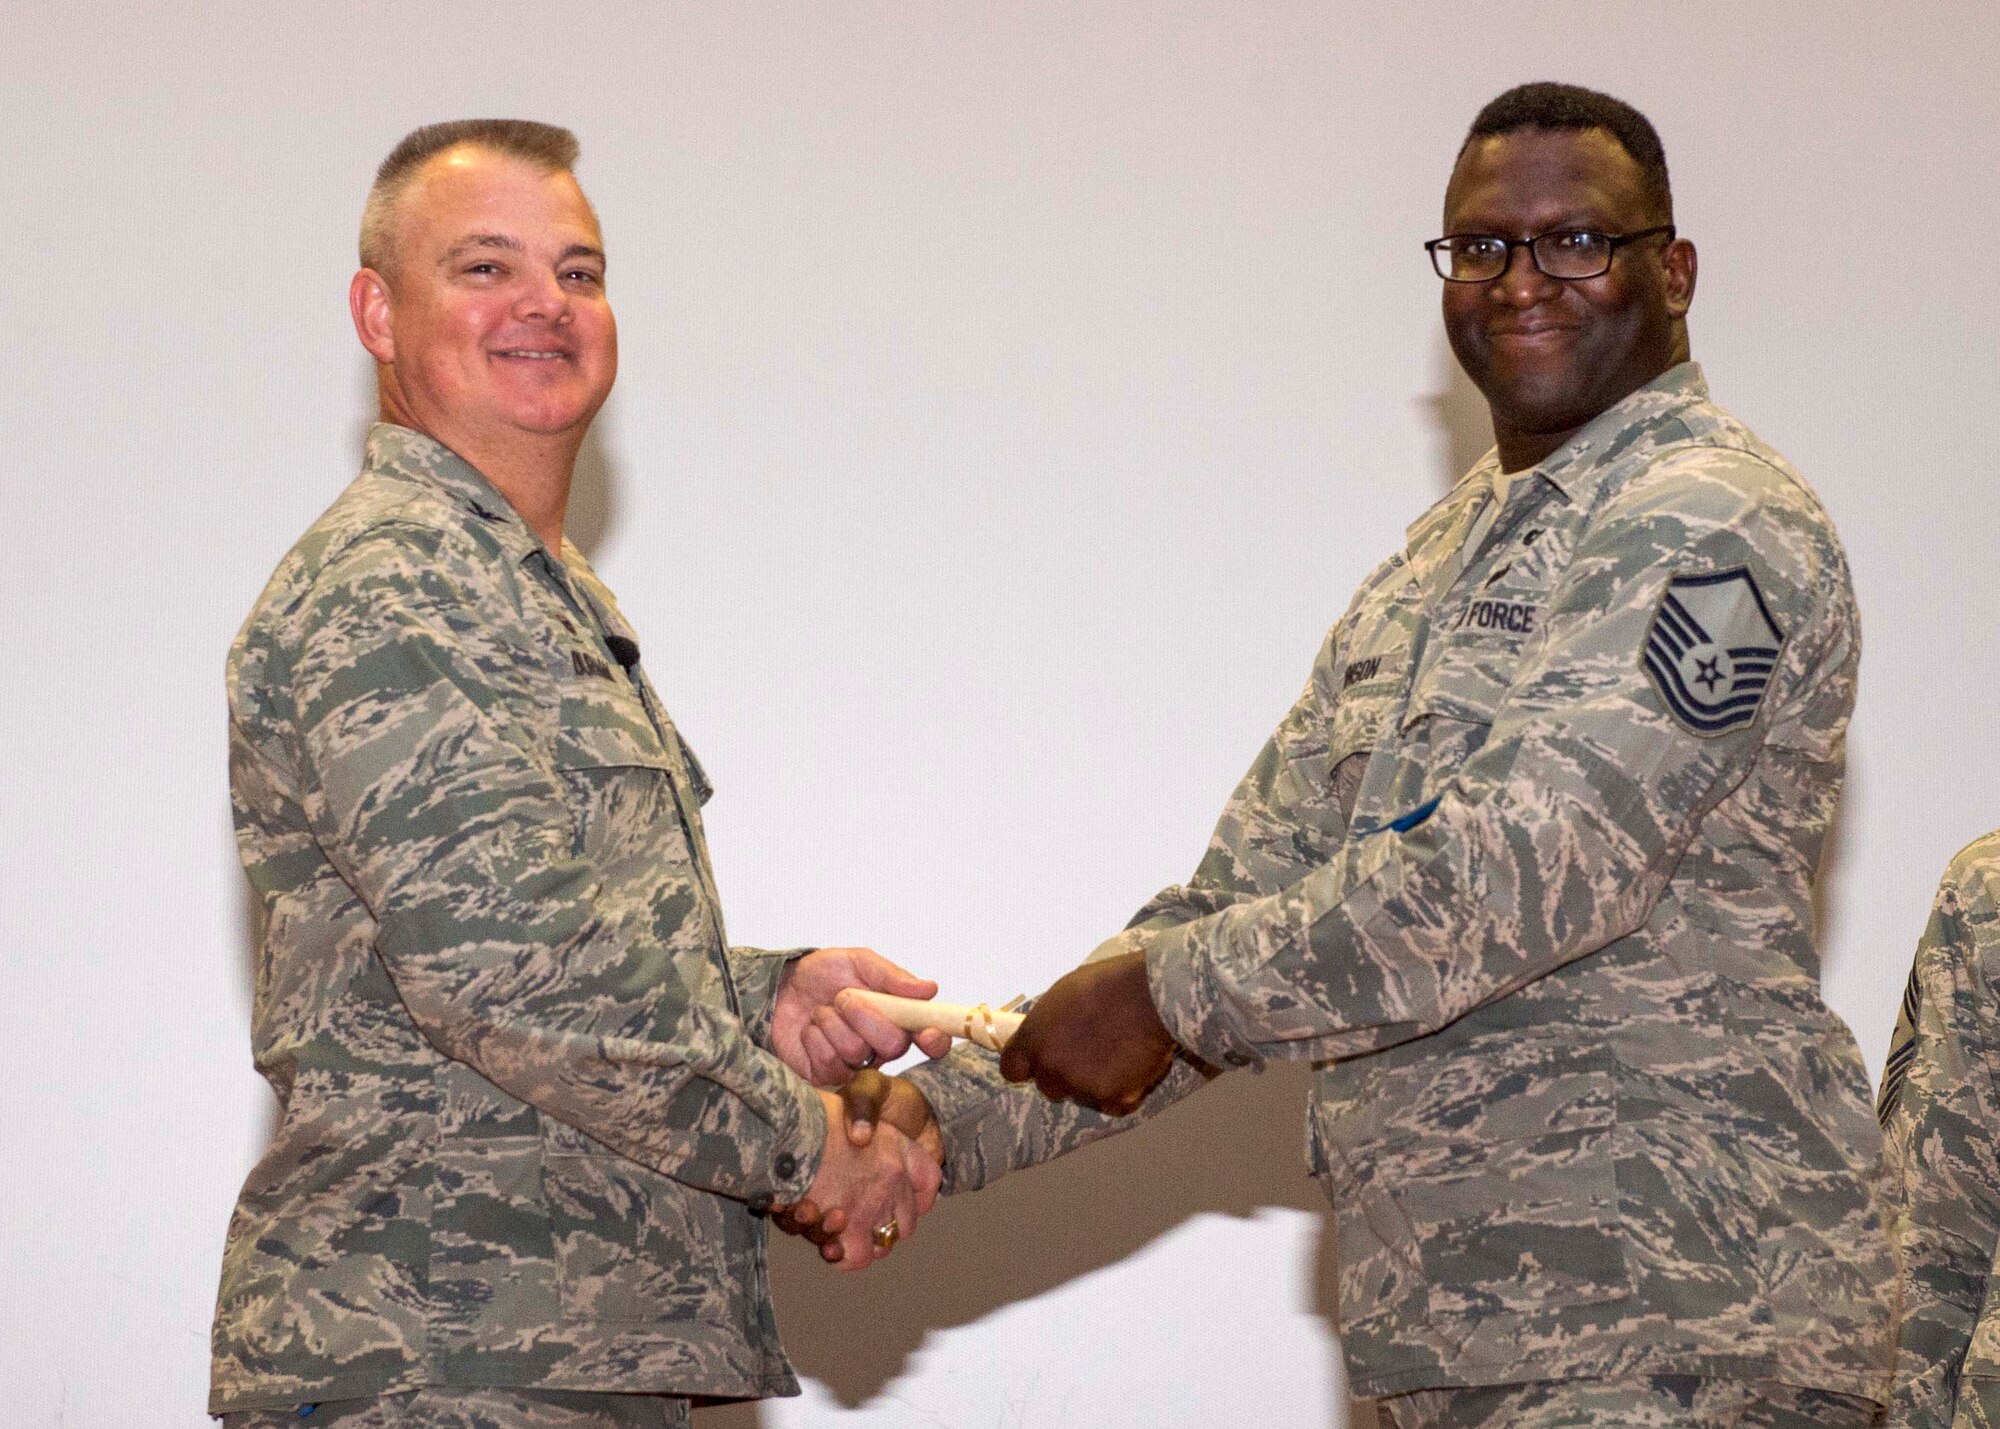 Master Sgt. Darnell Johnson, 512th Aircraft Maintenance Squadron, shakes hands with Col. Scott D. Durham, 512th Airlift Wing commander, during the wing's Community College of the Air Force graduation ceremony Dec. 3, 2016, Dover Air Force Base, Del. The wing surpassed their goal of awarding 100 CCAF degrees during the year and awarded 109 degrees. (U.S. Air Force Photo/Staff Sgt. Renee Jackson)